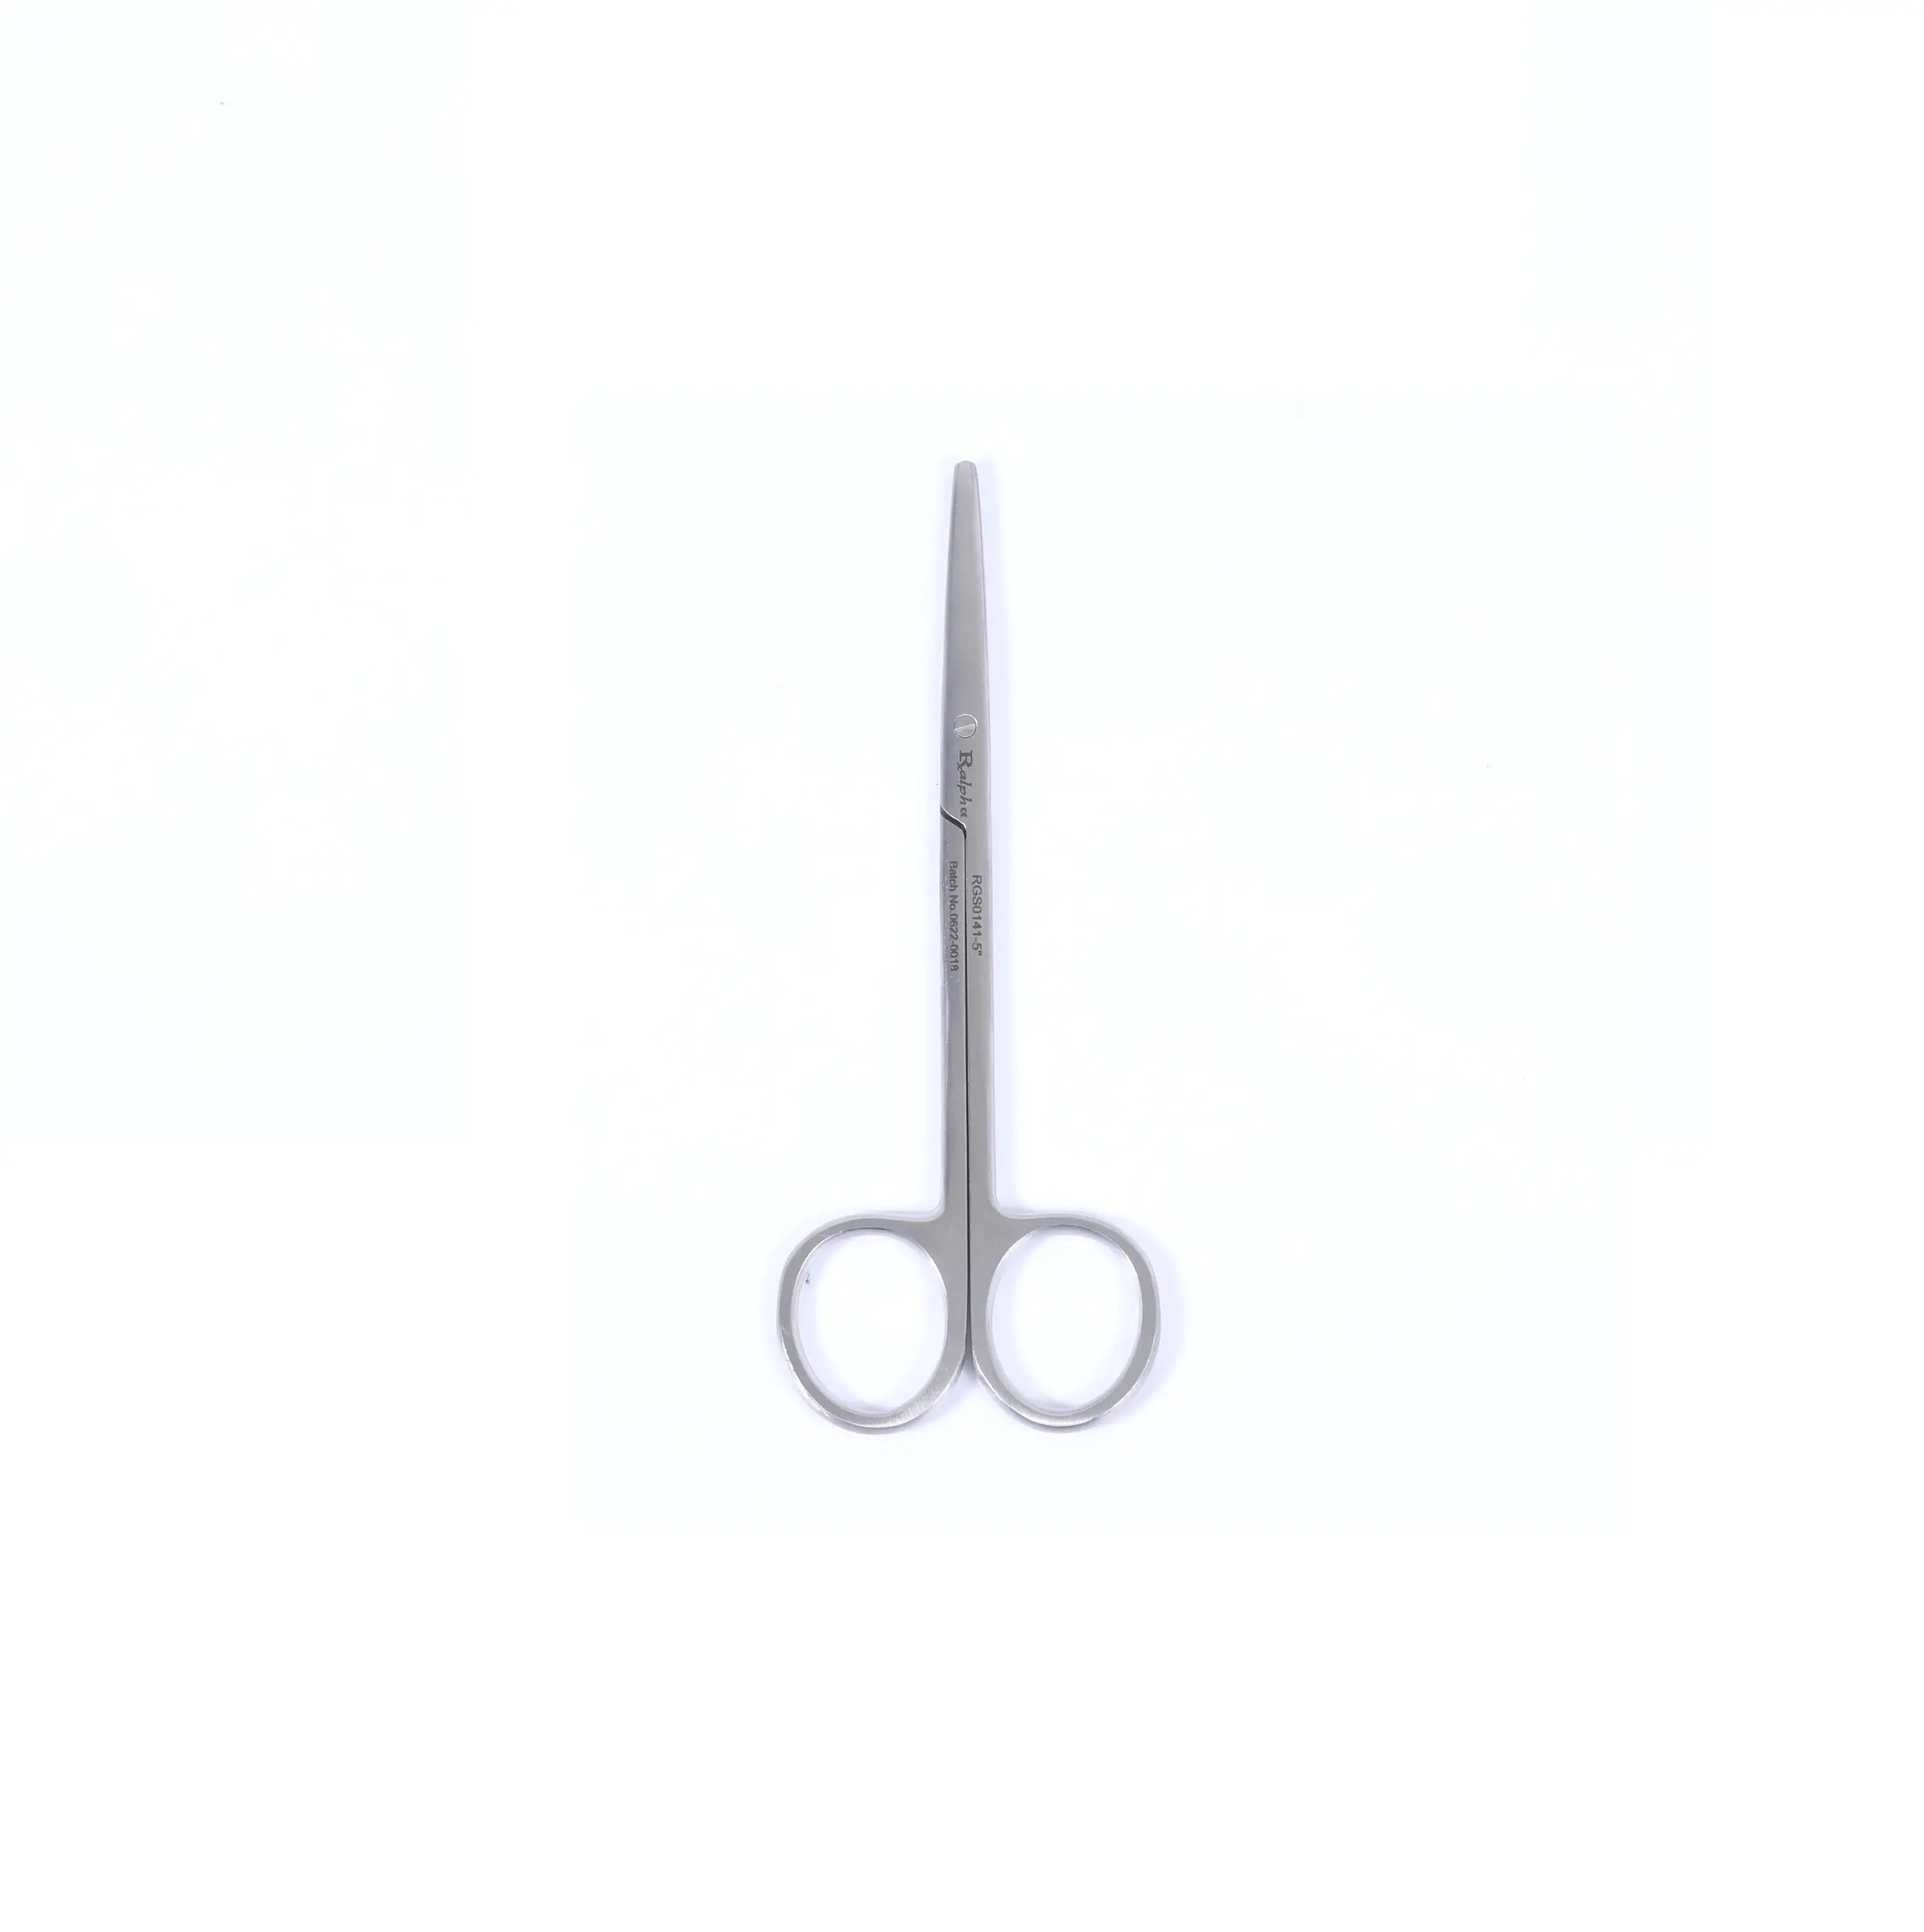 Best Selling Curve And Straight Metzenbaum Scissors Surgical Instrument Available At Affordable Price From India